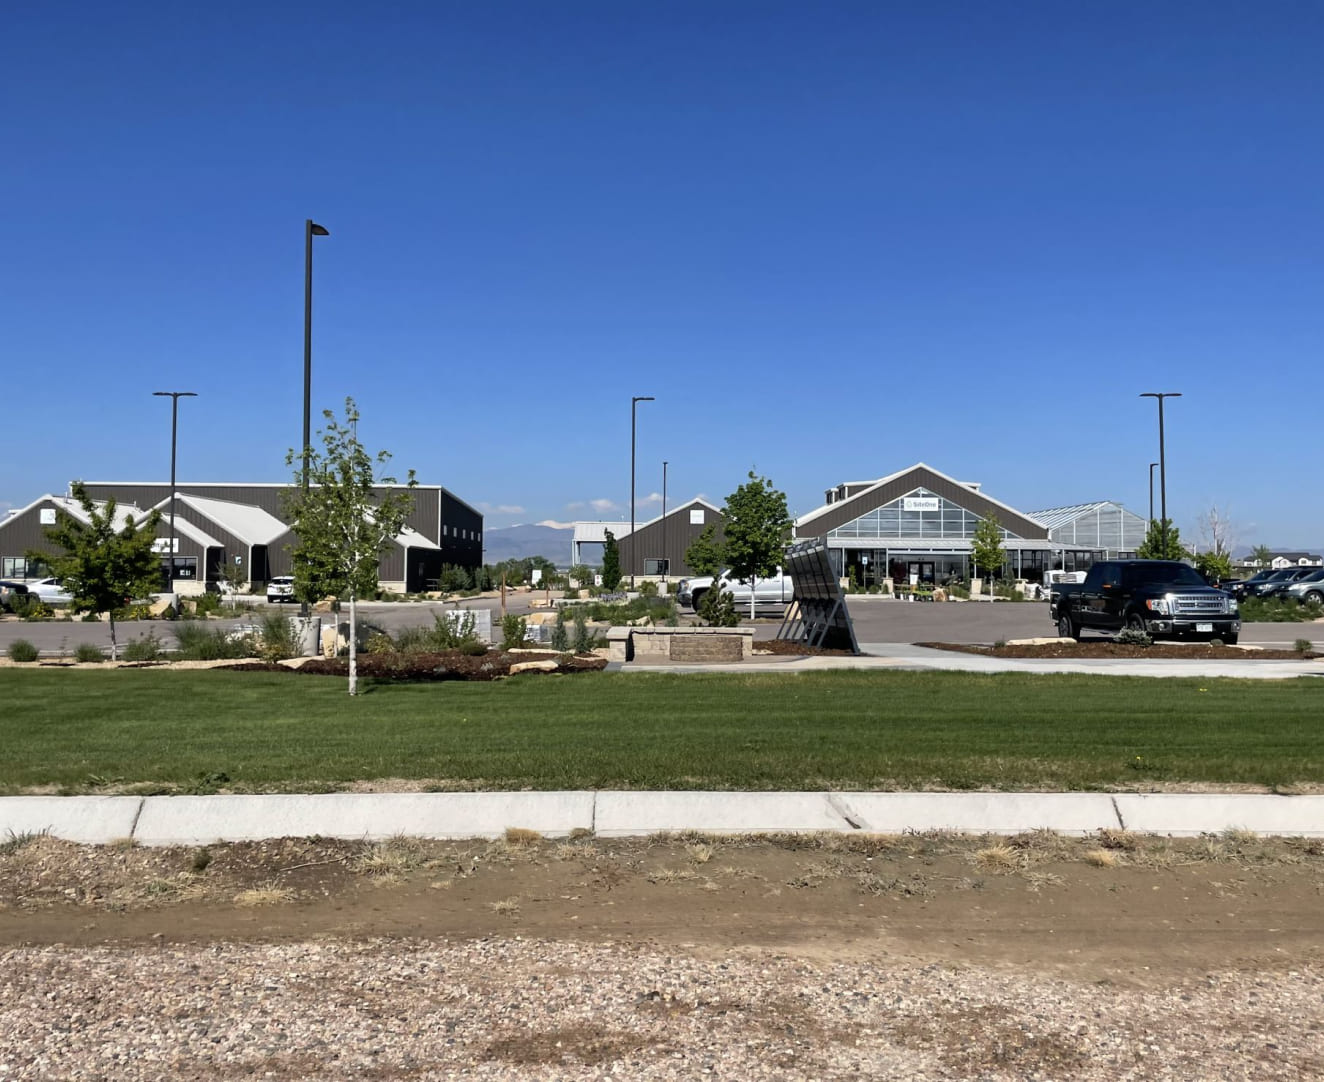 Roadside view of 6166 Weld County Road 74 in Windsor, CO. The property spans two buildings and a parking lot.